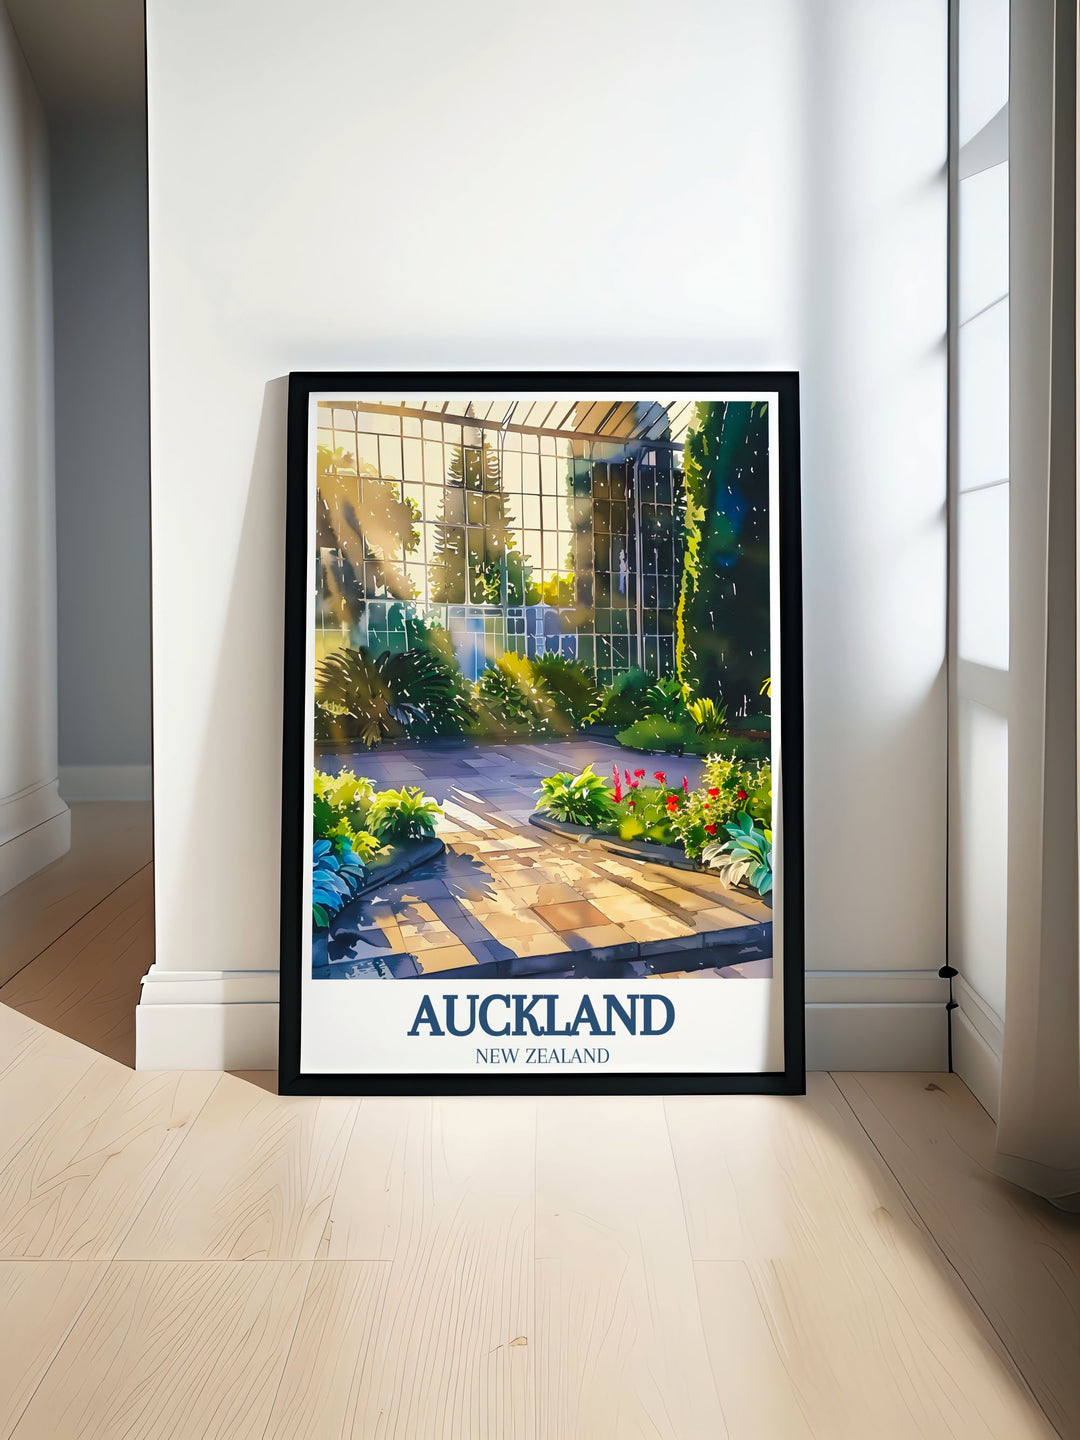 Stunning wall art featuring Auckland Domain in Auckland, New Zealand, showcasing the lush green spaces and historical monuments of this iconic park.